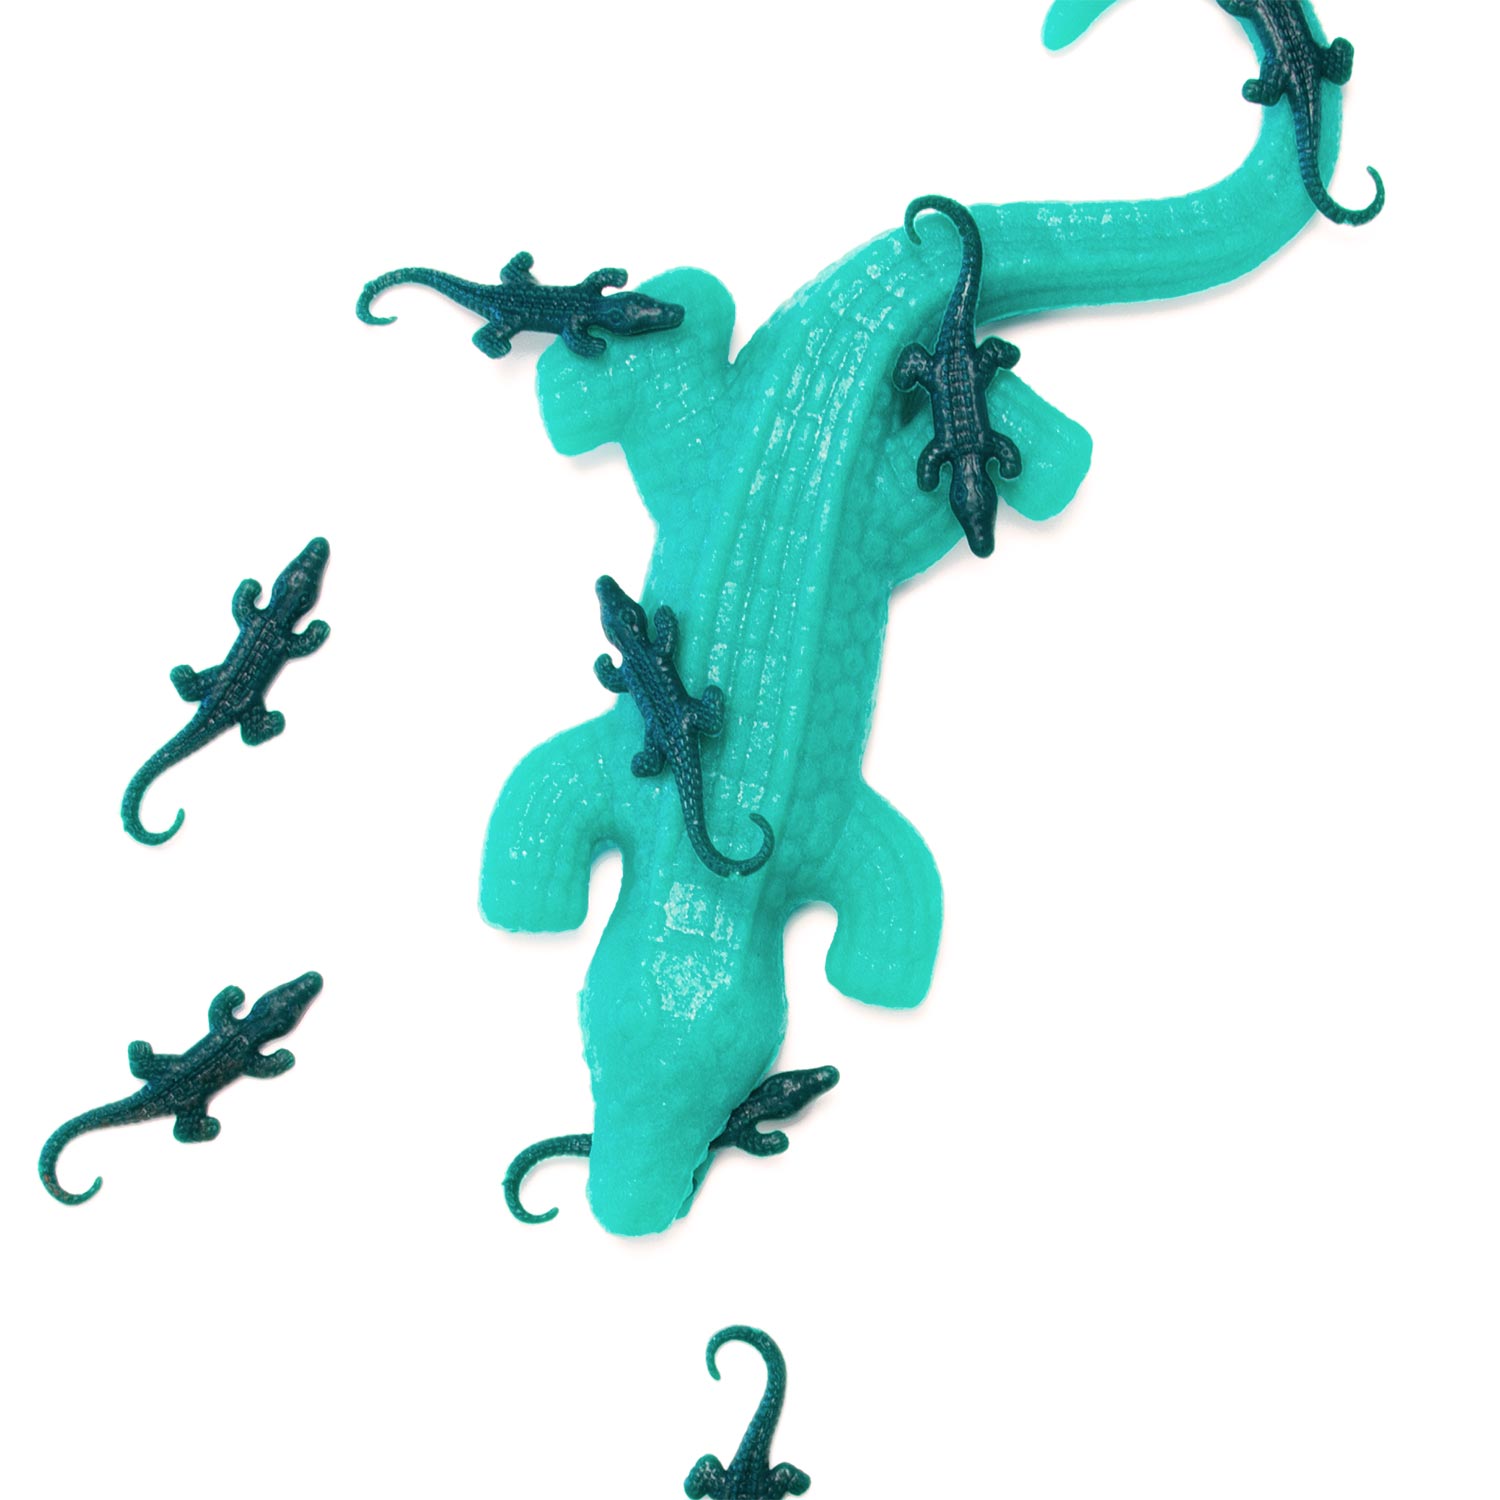 Small Growing Alligators (30 Pack)